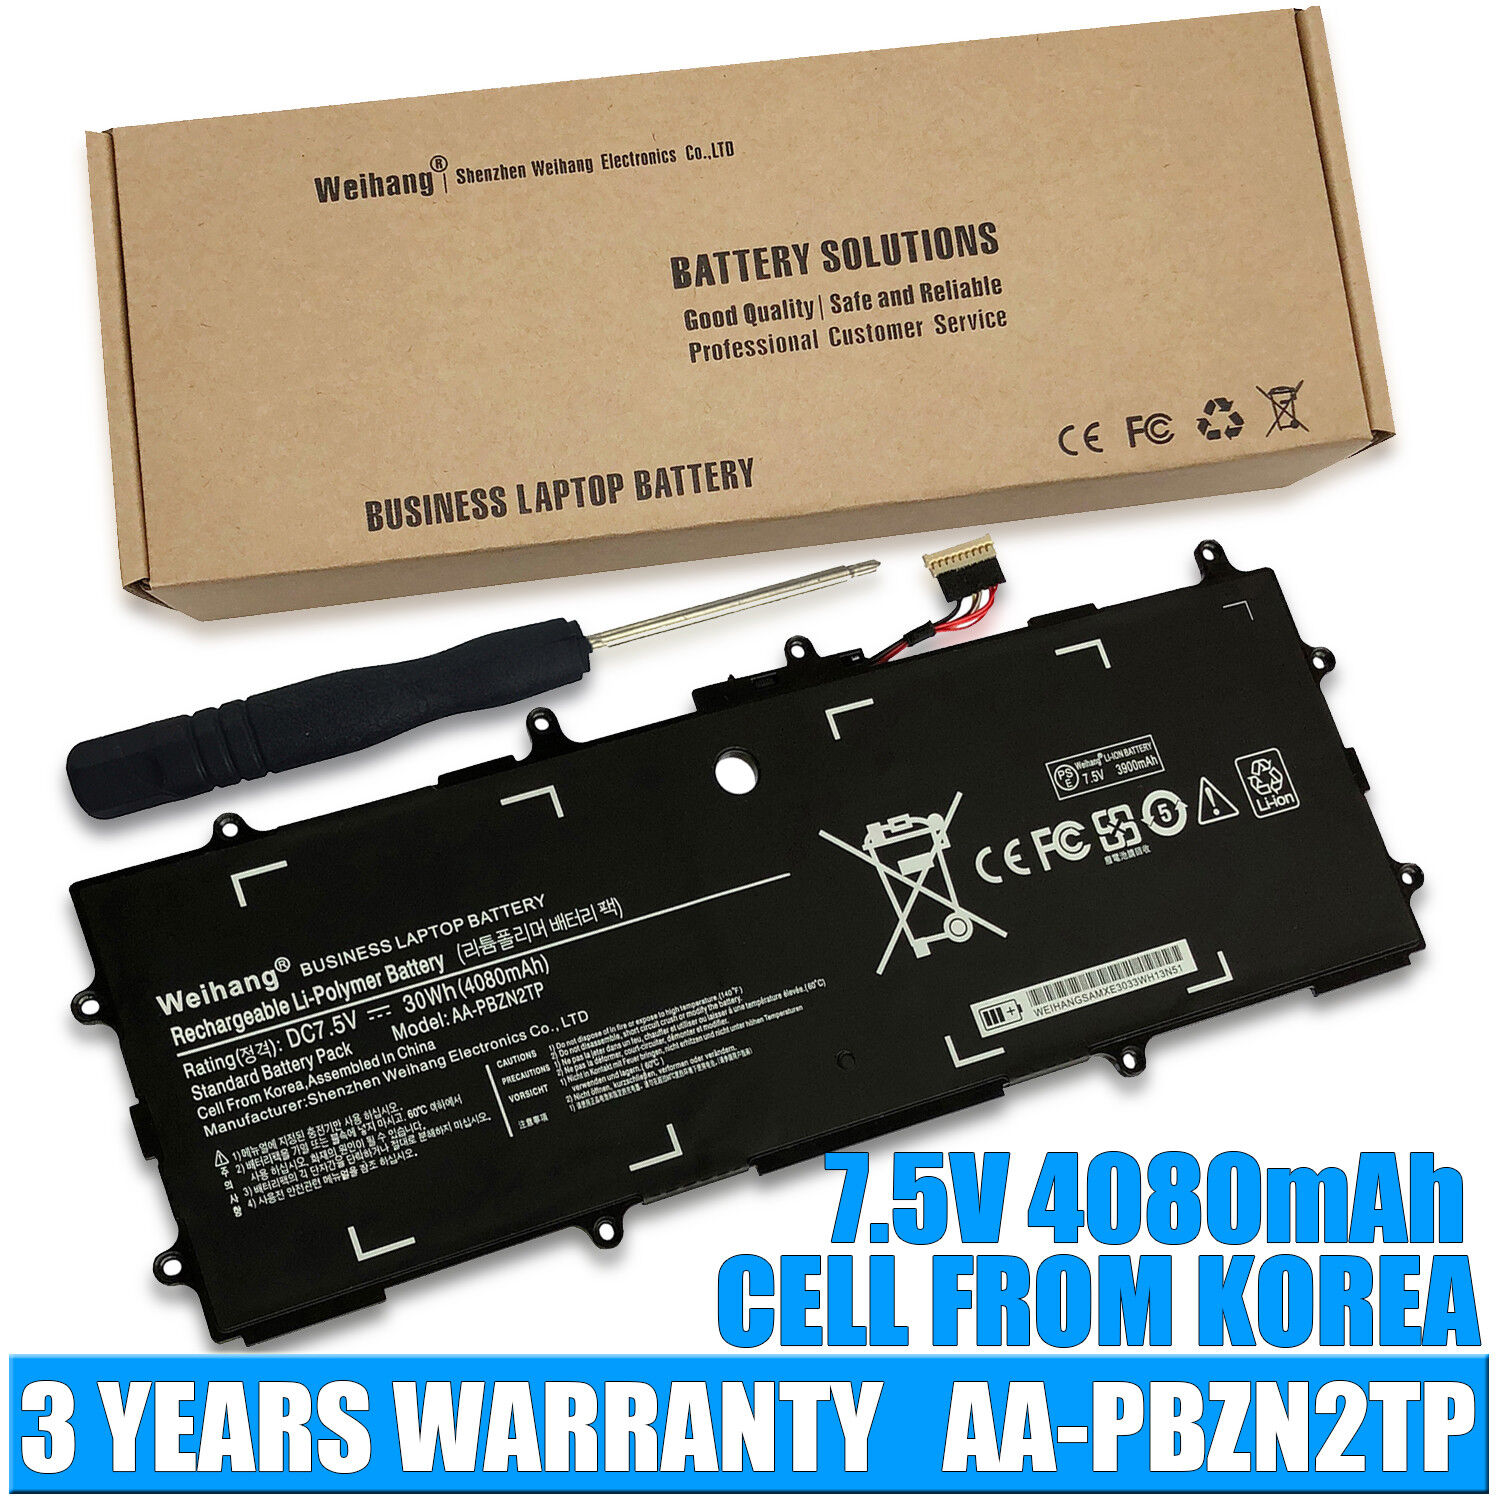 Genuine Weihang Battery AA-PBZN2TP for samsung XE500T1C NP910S3G 905s3g USA